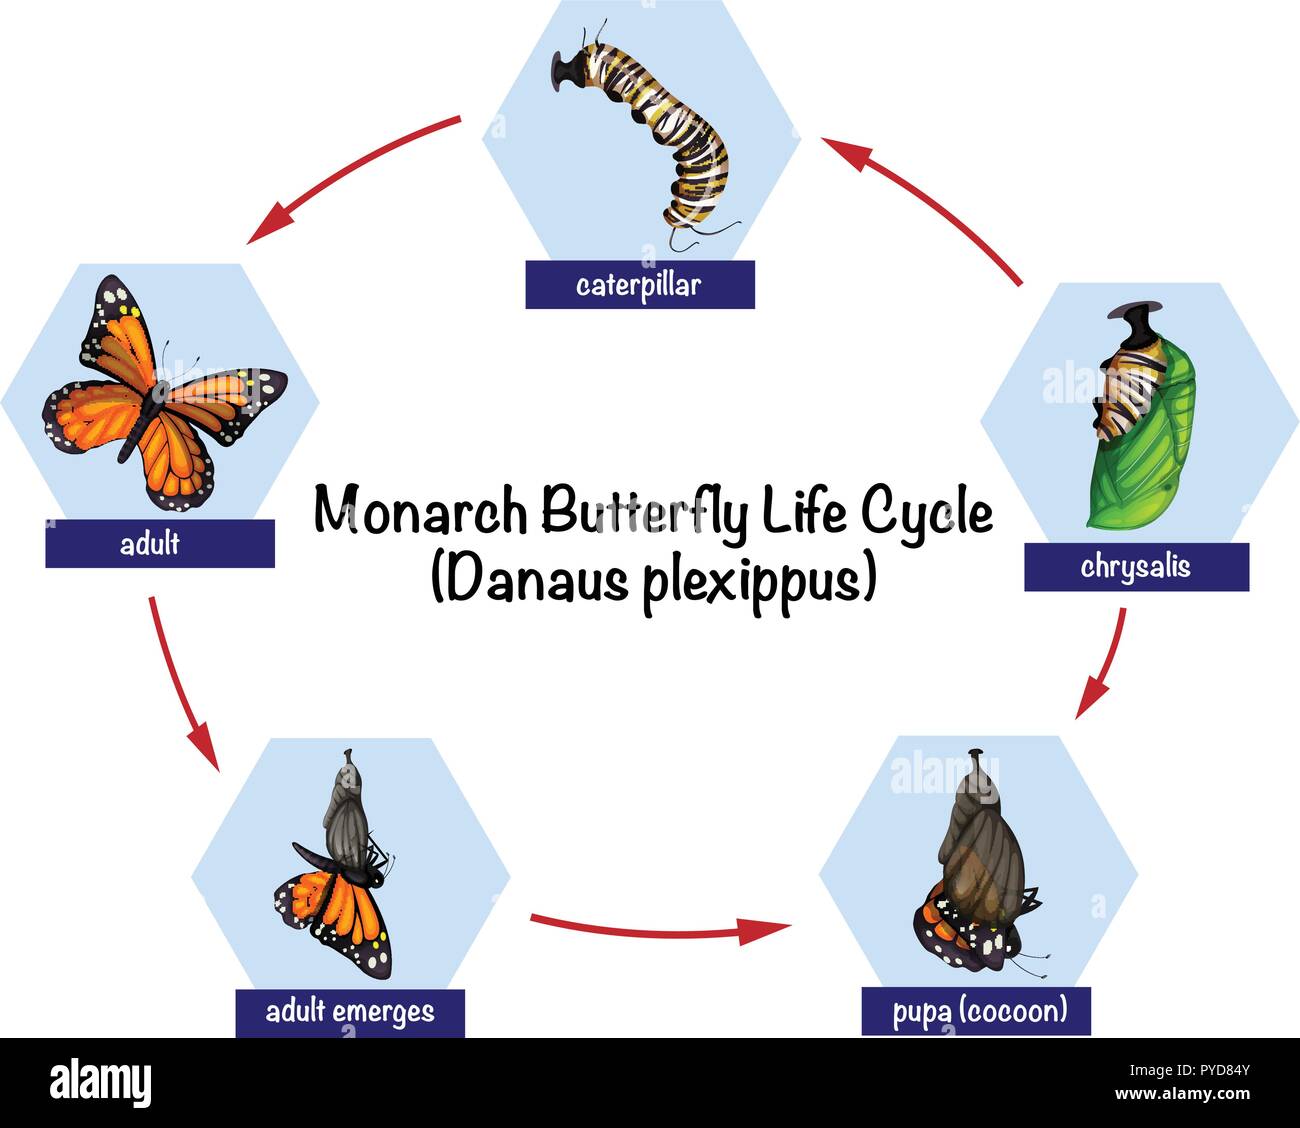 Monarch butterfly life cycle illustration Stock Vector